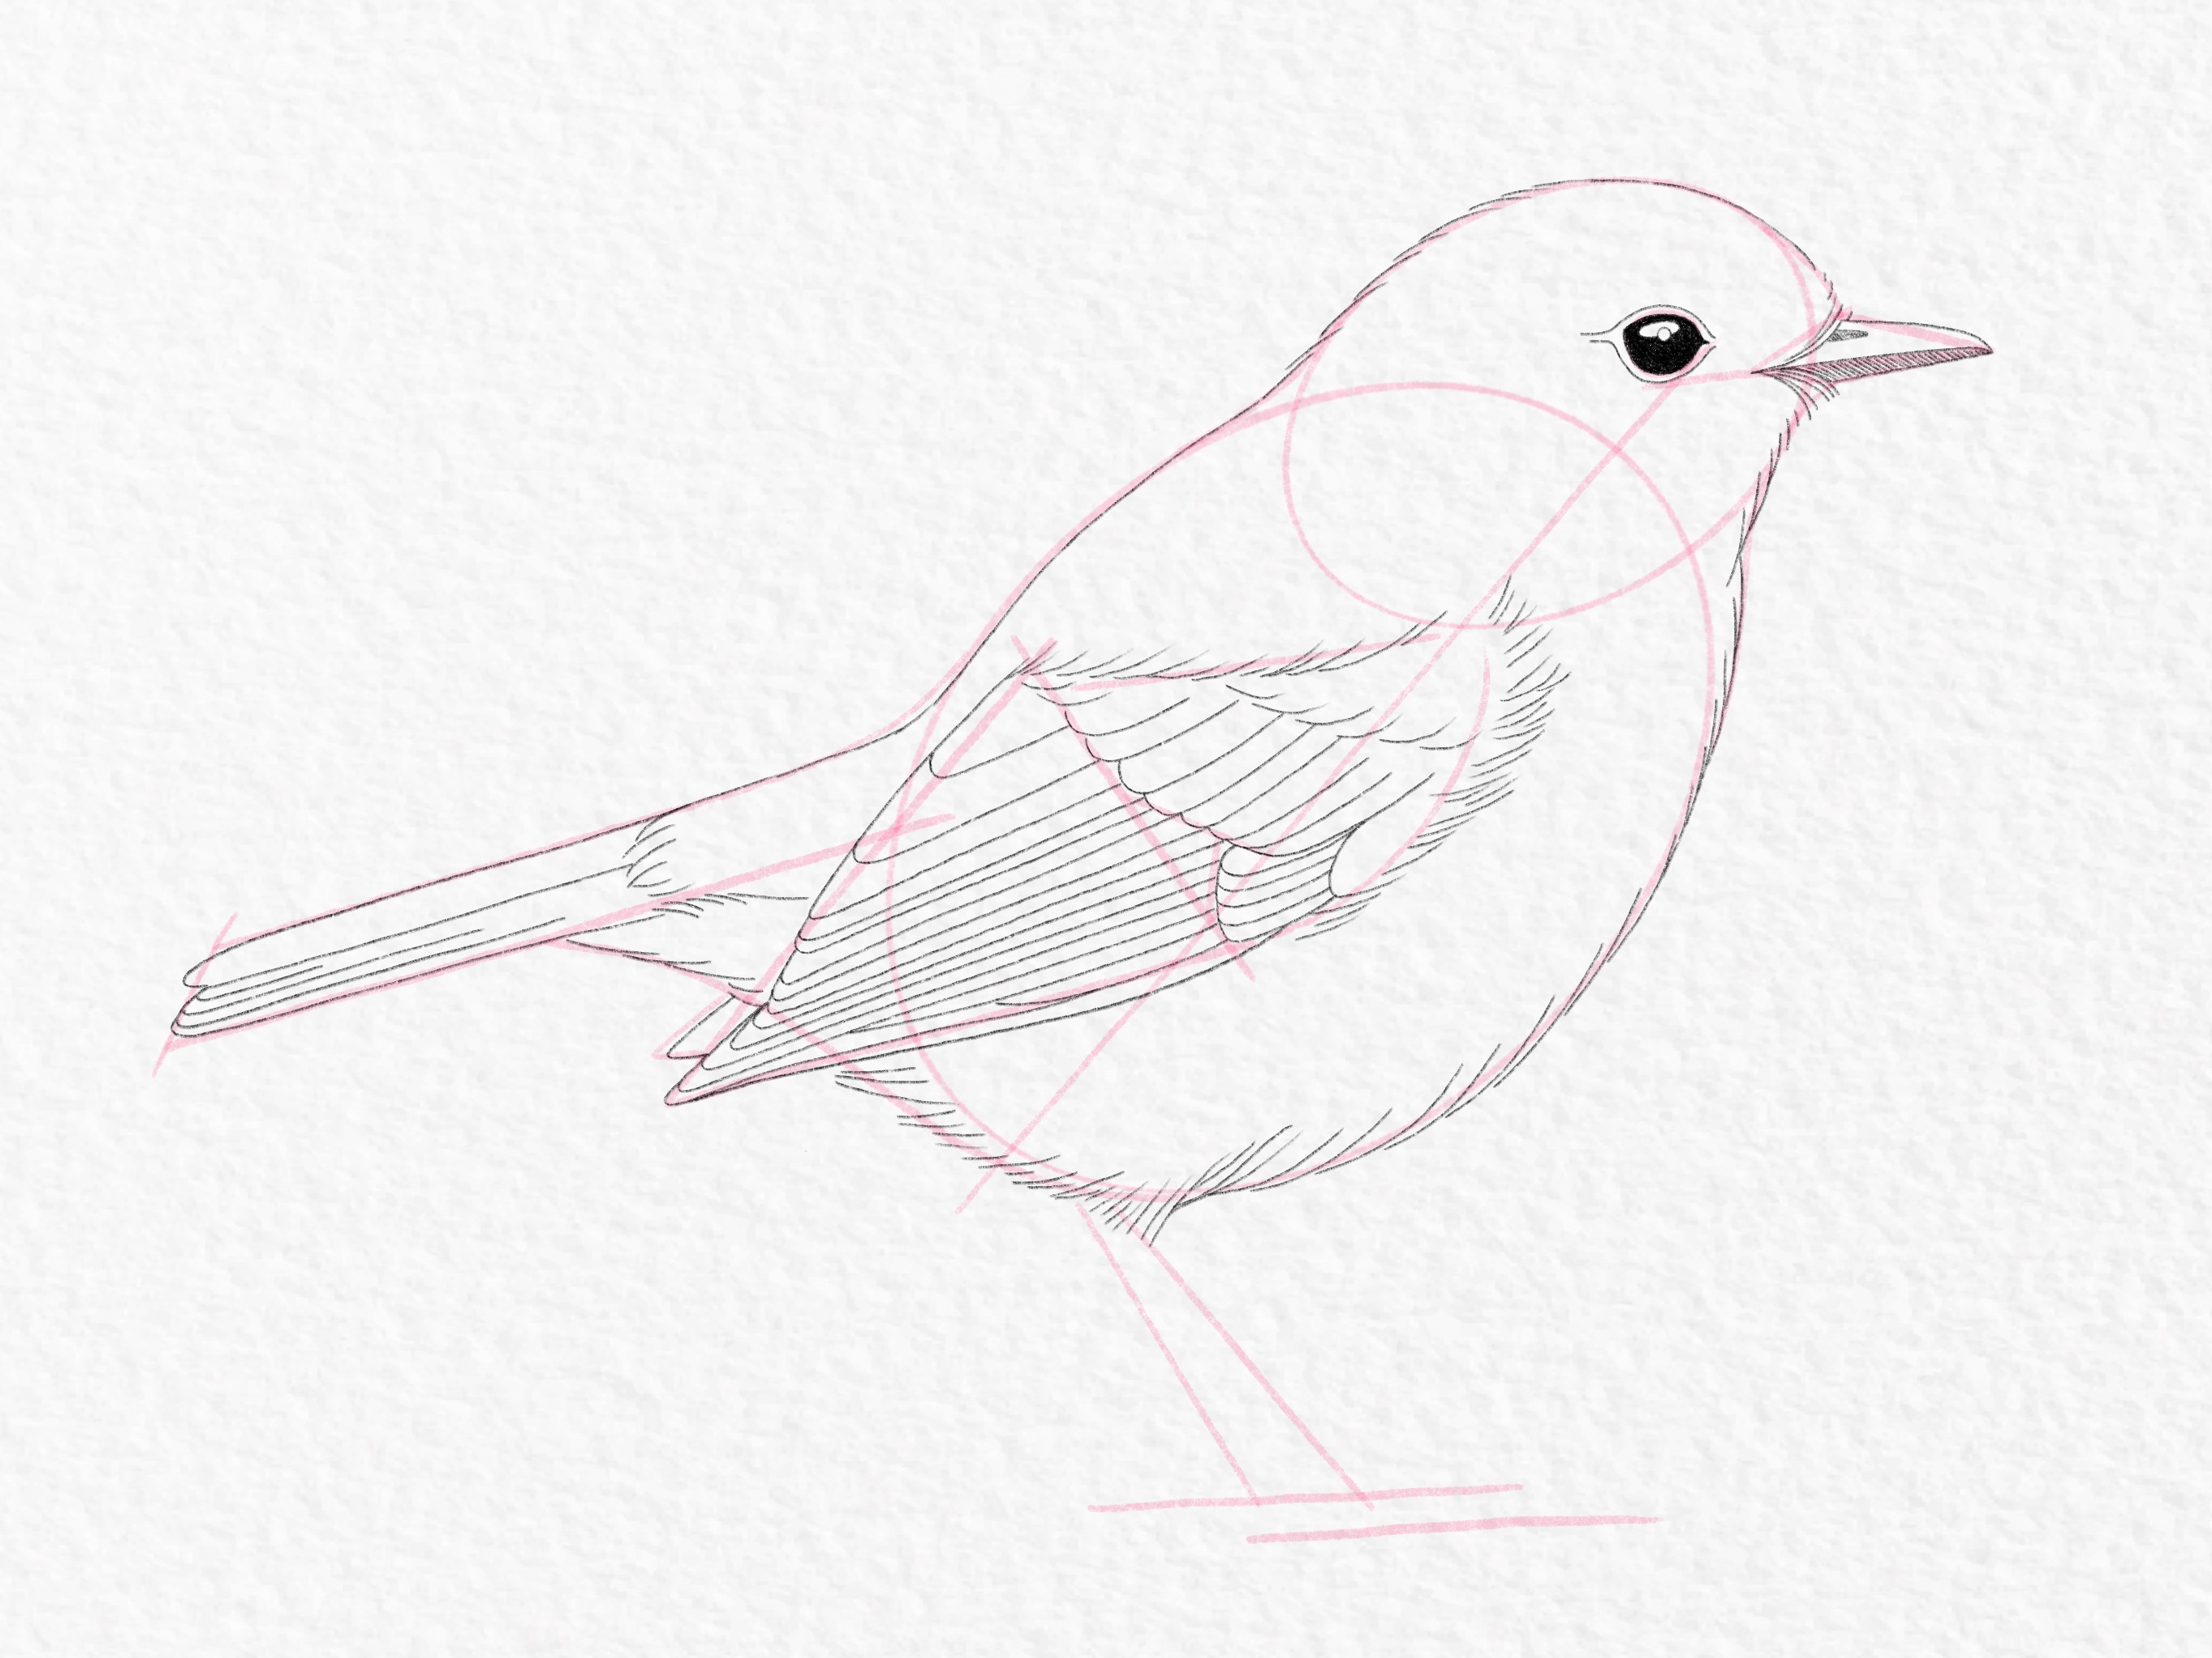 Simple Bird Drawing | Easy Pencil Sketch and Shading #drawing - YouTube